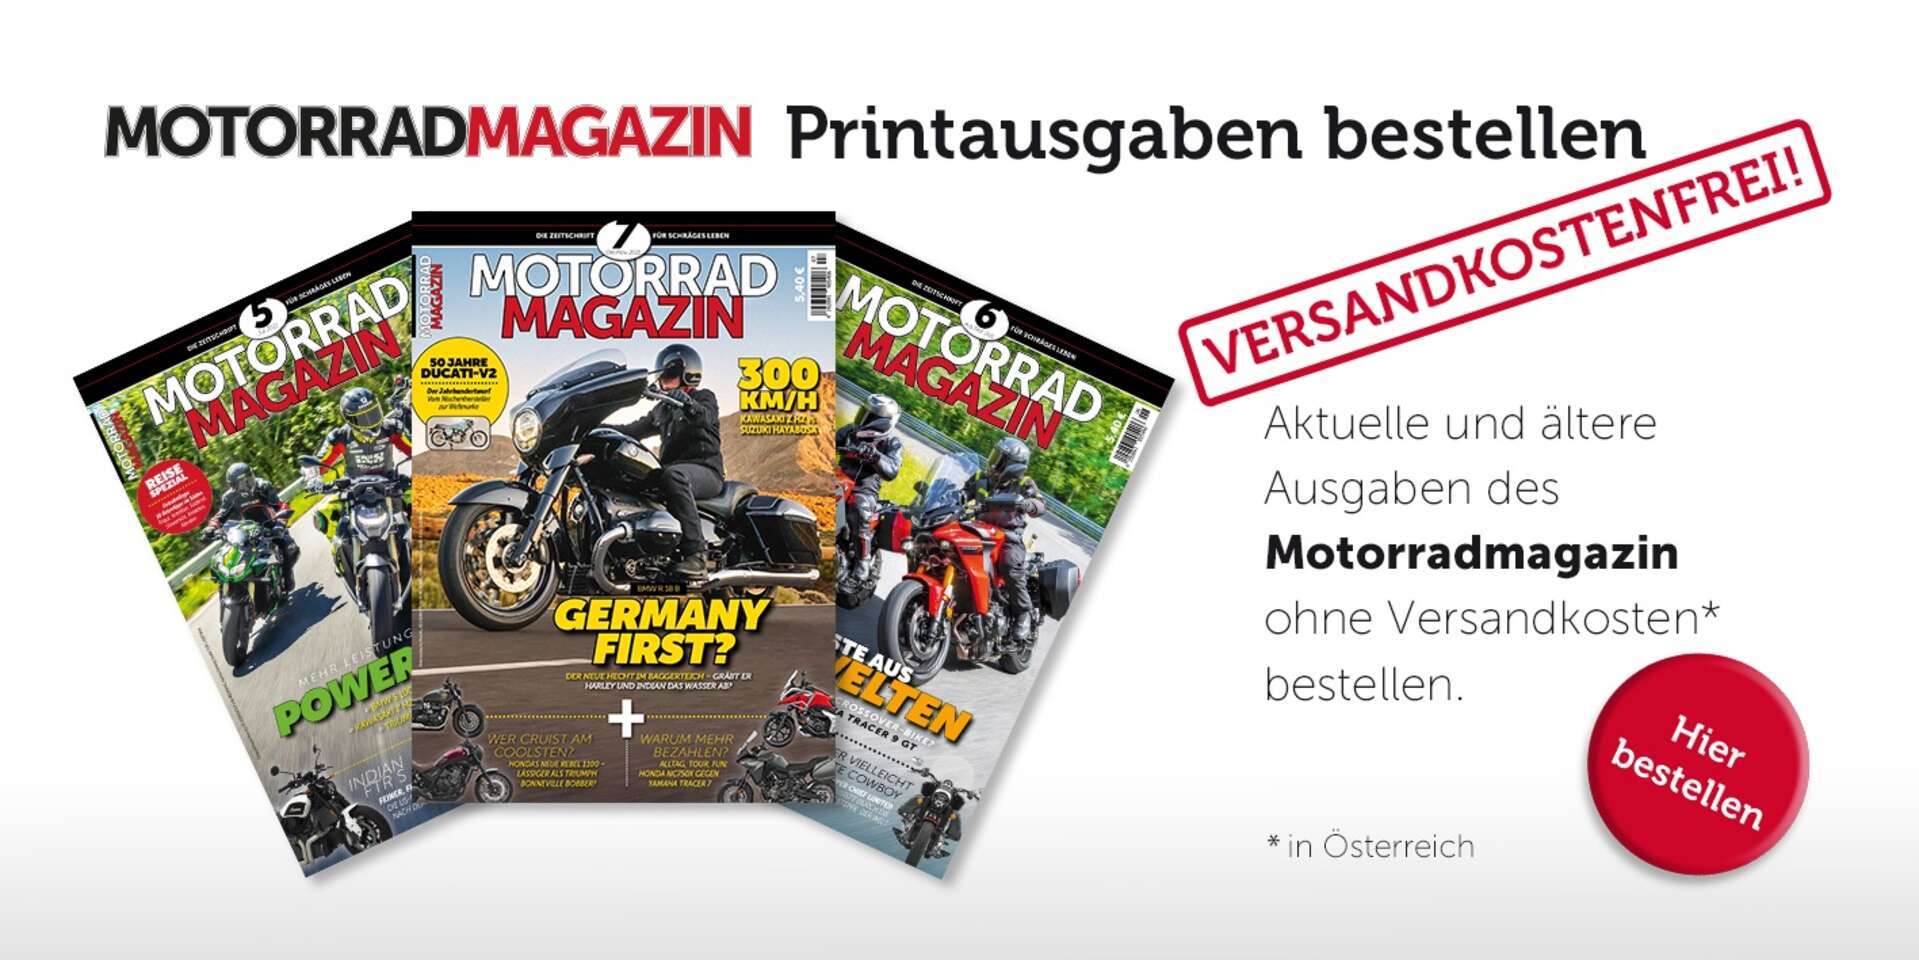 Order the print editions of Motorcycle Magazine